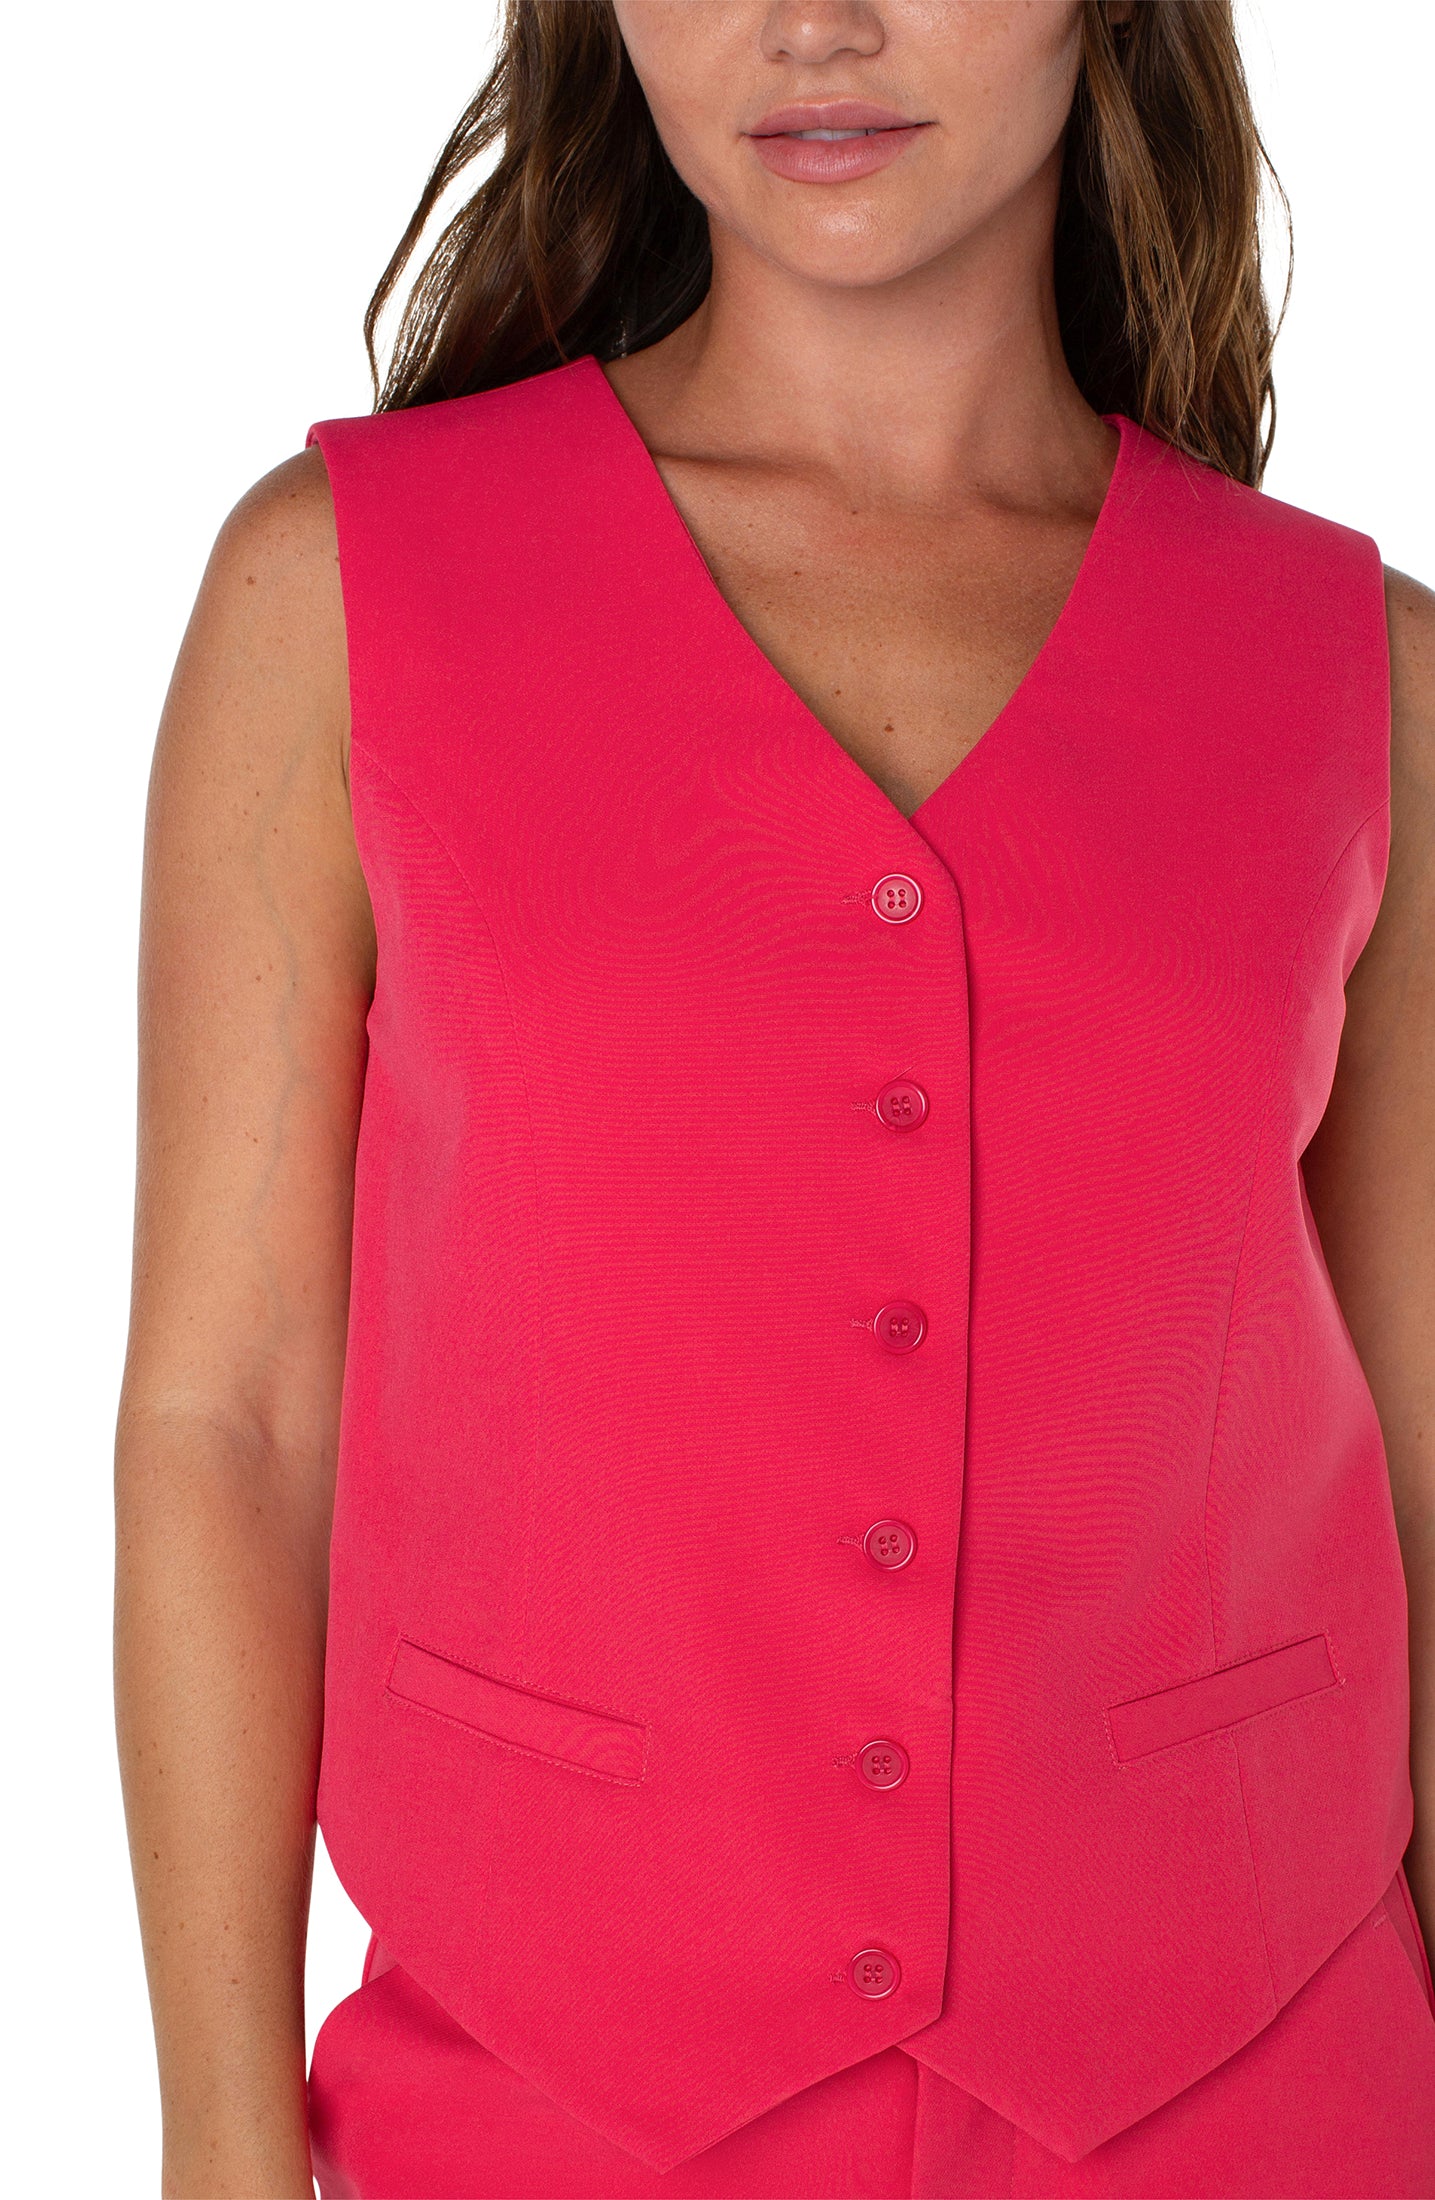 LVP Vest with Pockets - Pink Punch Close Up View